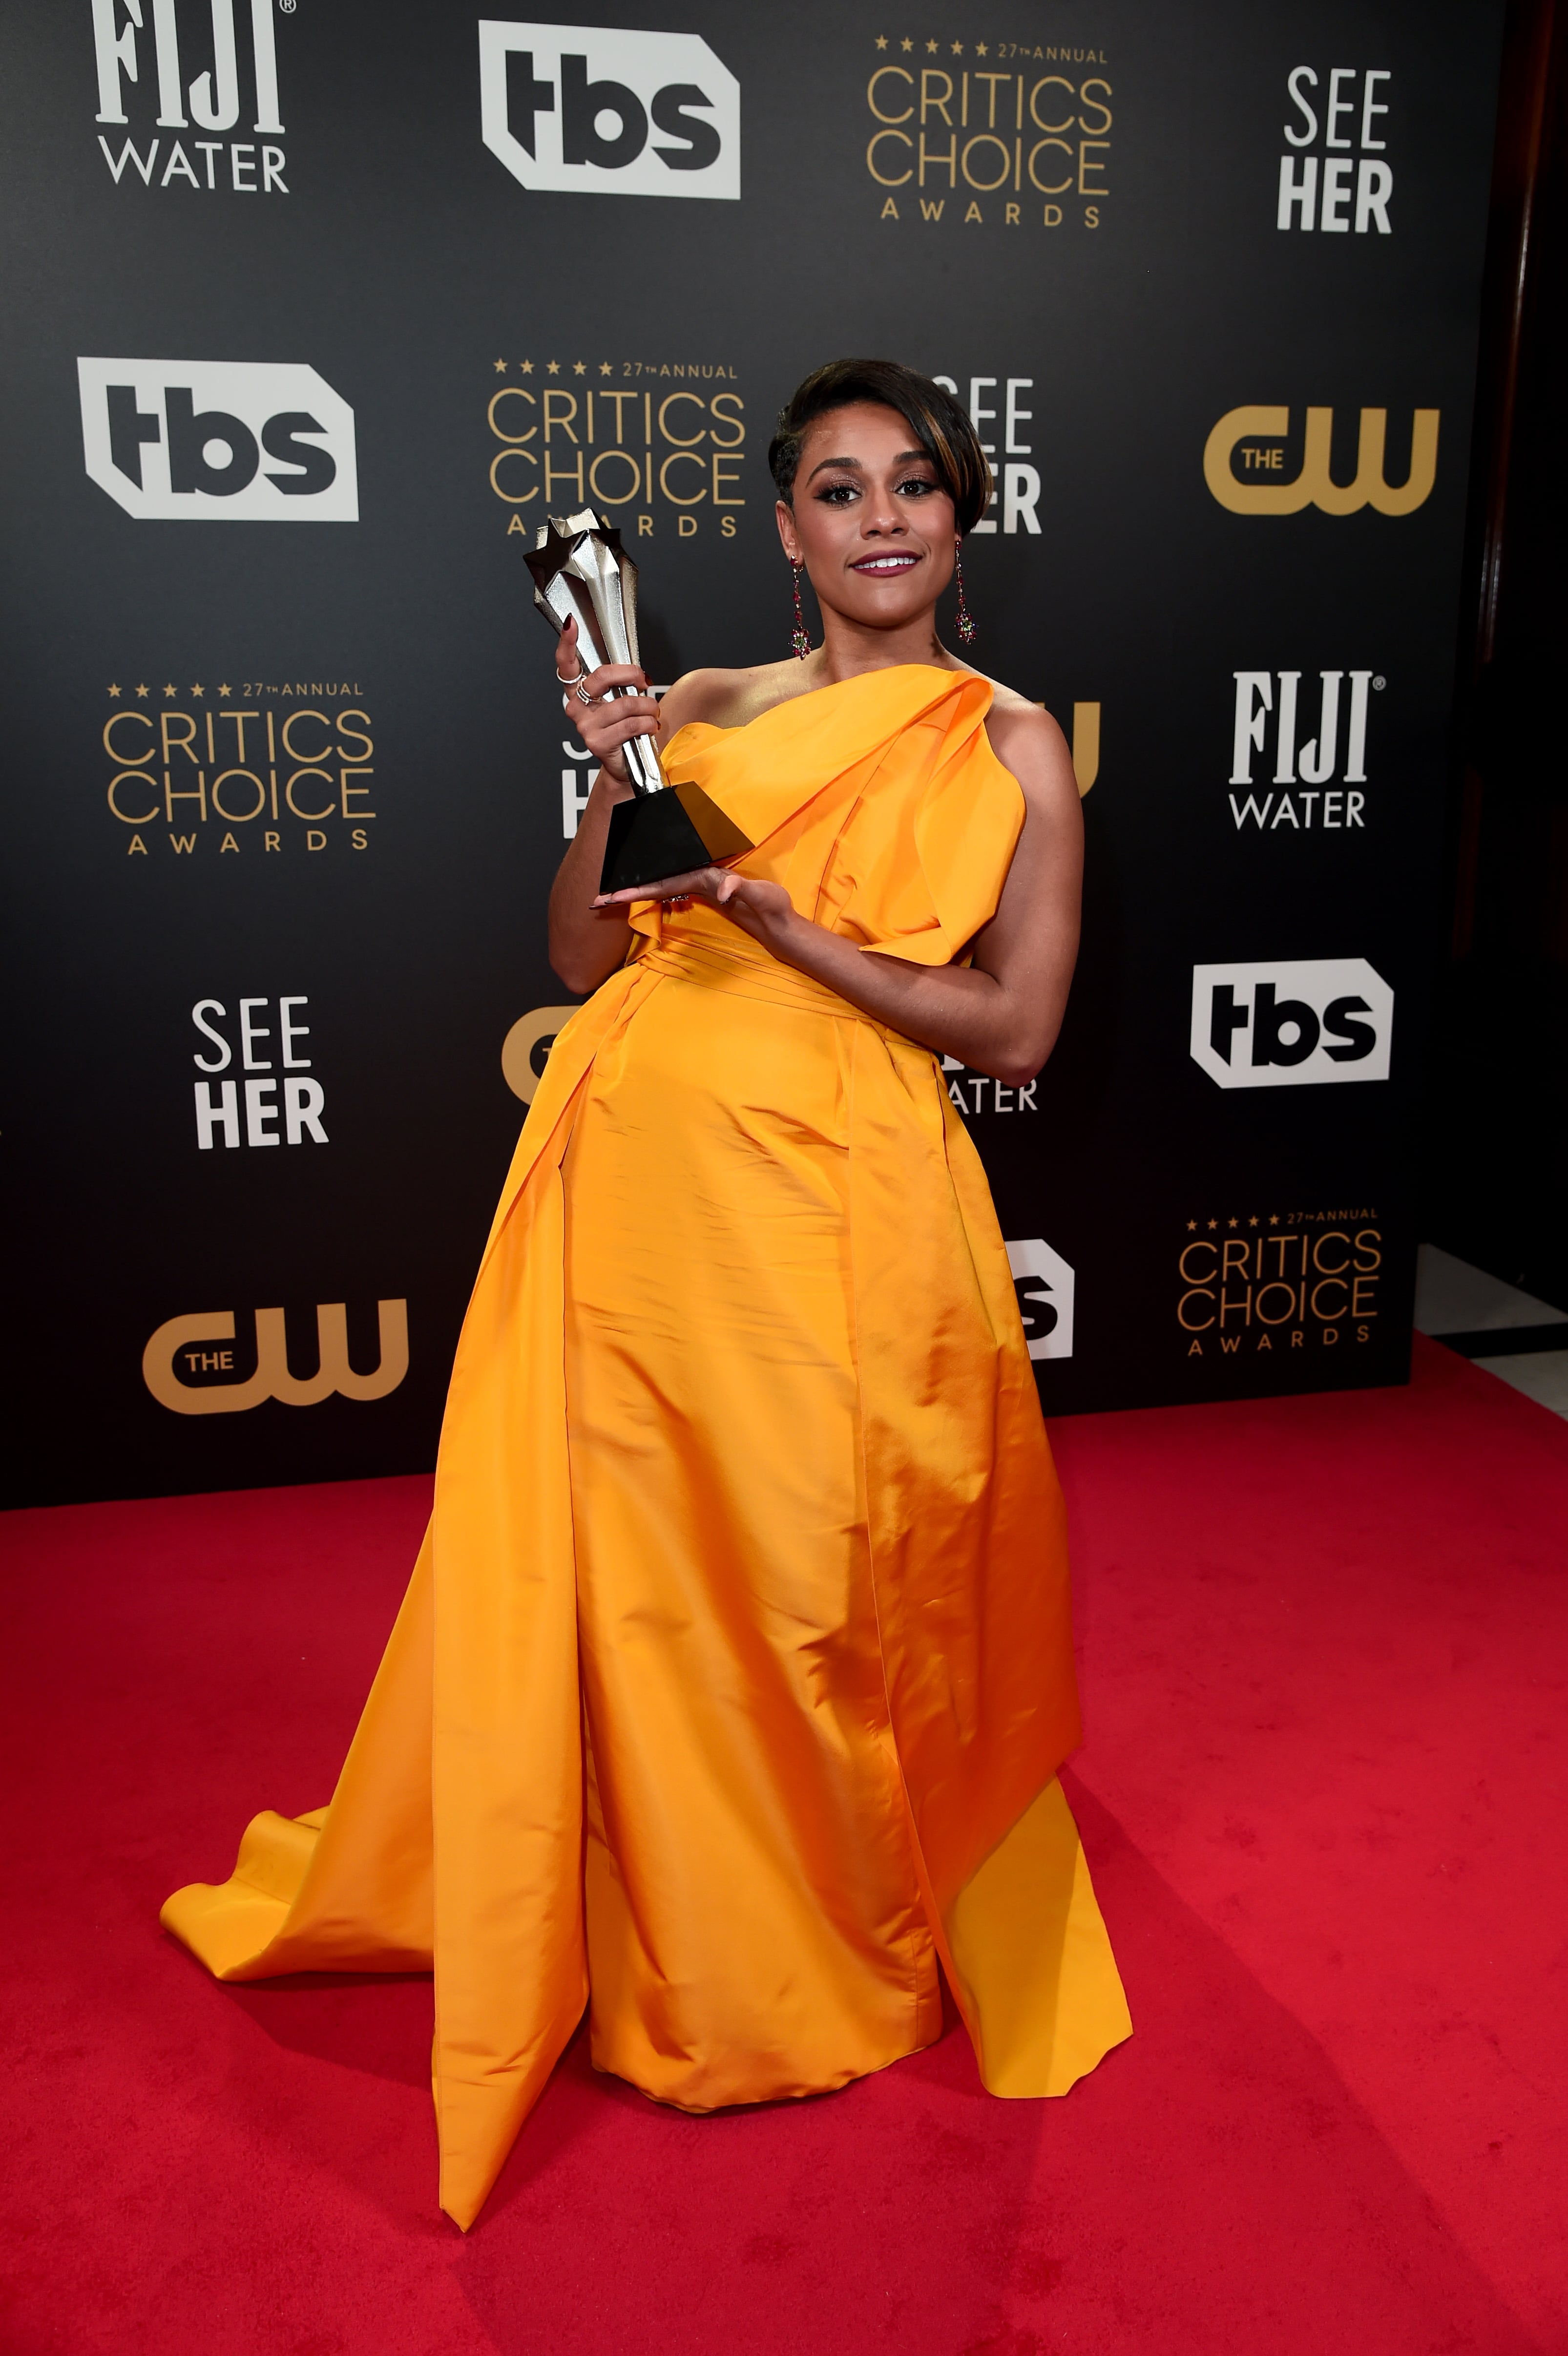 Critics' Choice Awards 2019: the best celebrity dresses from the red carpet